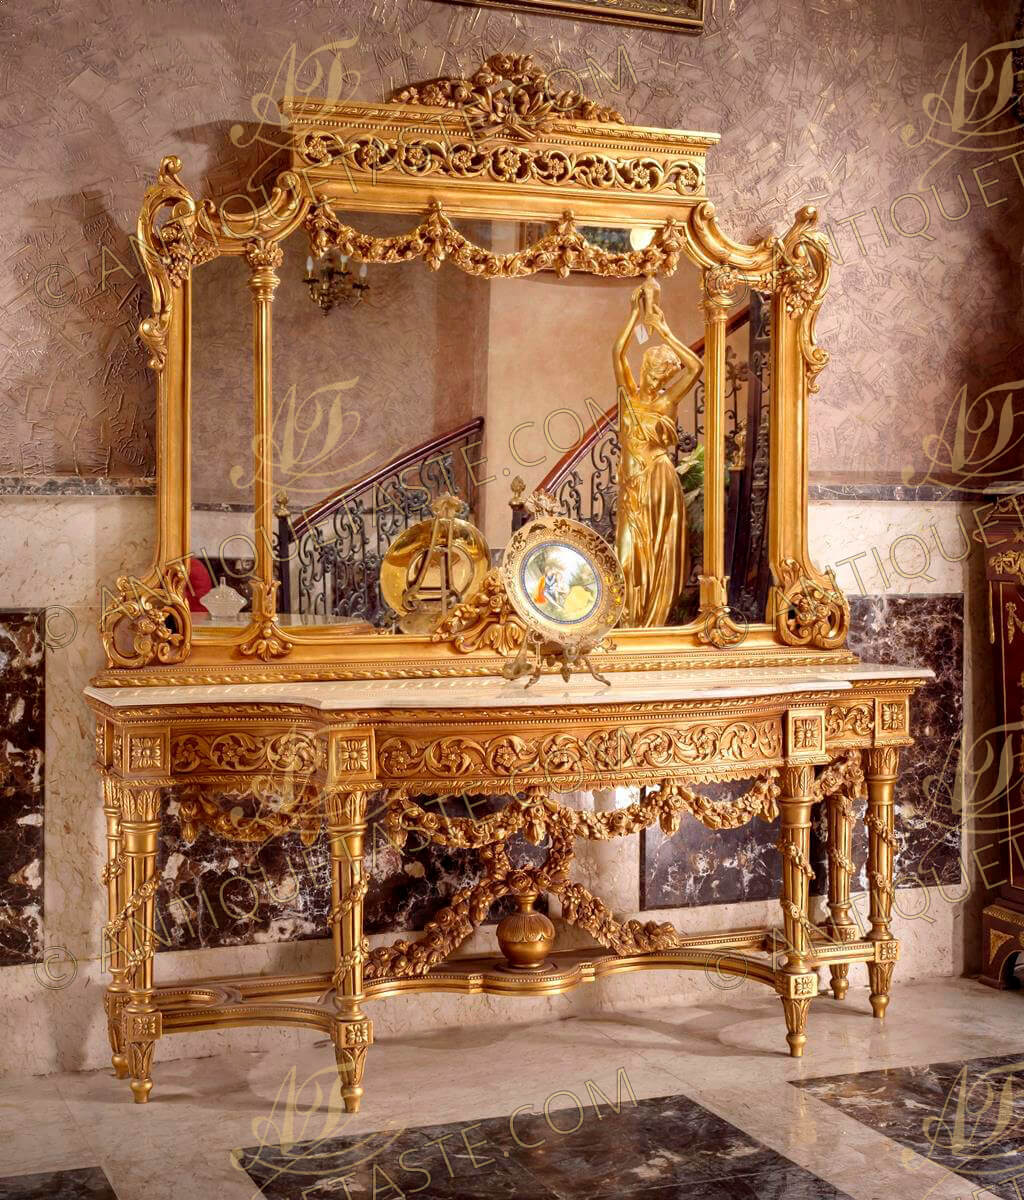 Monumental and Palatial Italian 19th century Louis XVI style carved and gilt wood grand console with mirror hand carved garlands, swags, blossoms and pierced carvings all over, the beautiful piece is gilded with French gold leaves and raised on tapered reeded legs coiled with descending floral garlands above toupie shaped acanthus leaves carved feet and rosette block, The legs are joined by a double rounded geometric beaded stretcher centered with an urn of prosperity and acorn finial above flanked by leaf garlands and blossoming flowers. The serpentine shape base is marble topped and of opulent apron bas-relief panel intricately carved with foliage and a flower amongst acanthus leaf scrolls above swagged floral garland central reserve with floral leaf carving below. The mirror has an elaborately carved floral acanthus and vines border with two fluted foliate crowned columns flanking central swagged floral garland surmounted with acanthus scrolls pierced relief. The curved top with impressive top tied ribbon crown surmounted with blossoming flowers